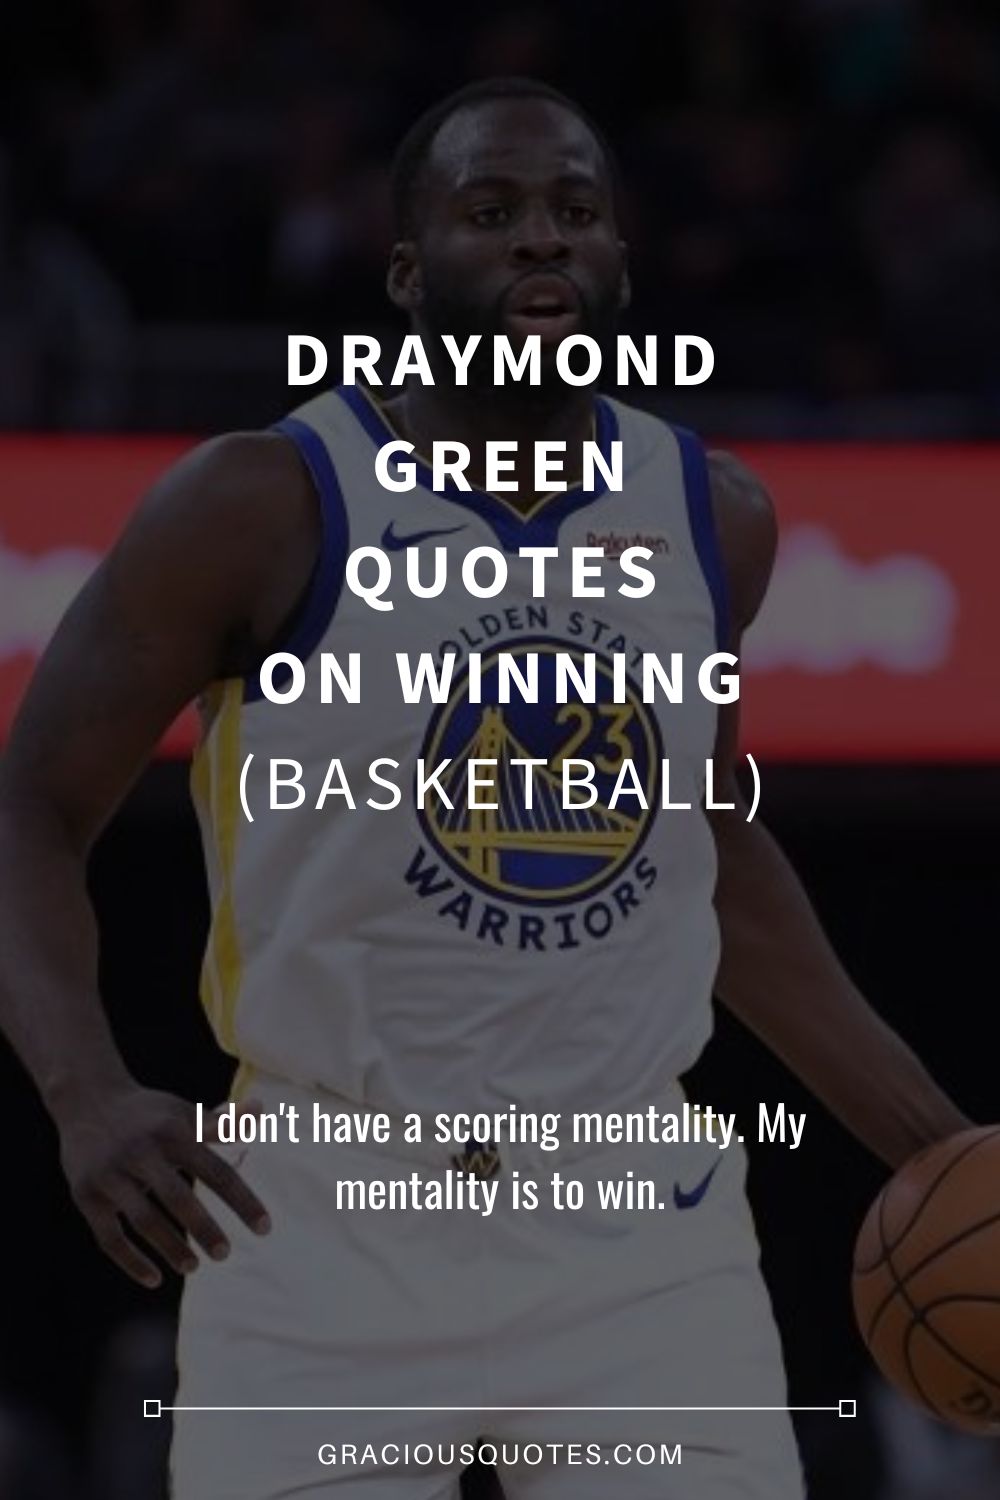 Draymond Green Quotes on Winning (BASKETBALL) - Gracious Quotes